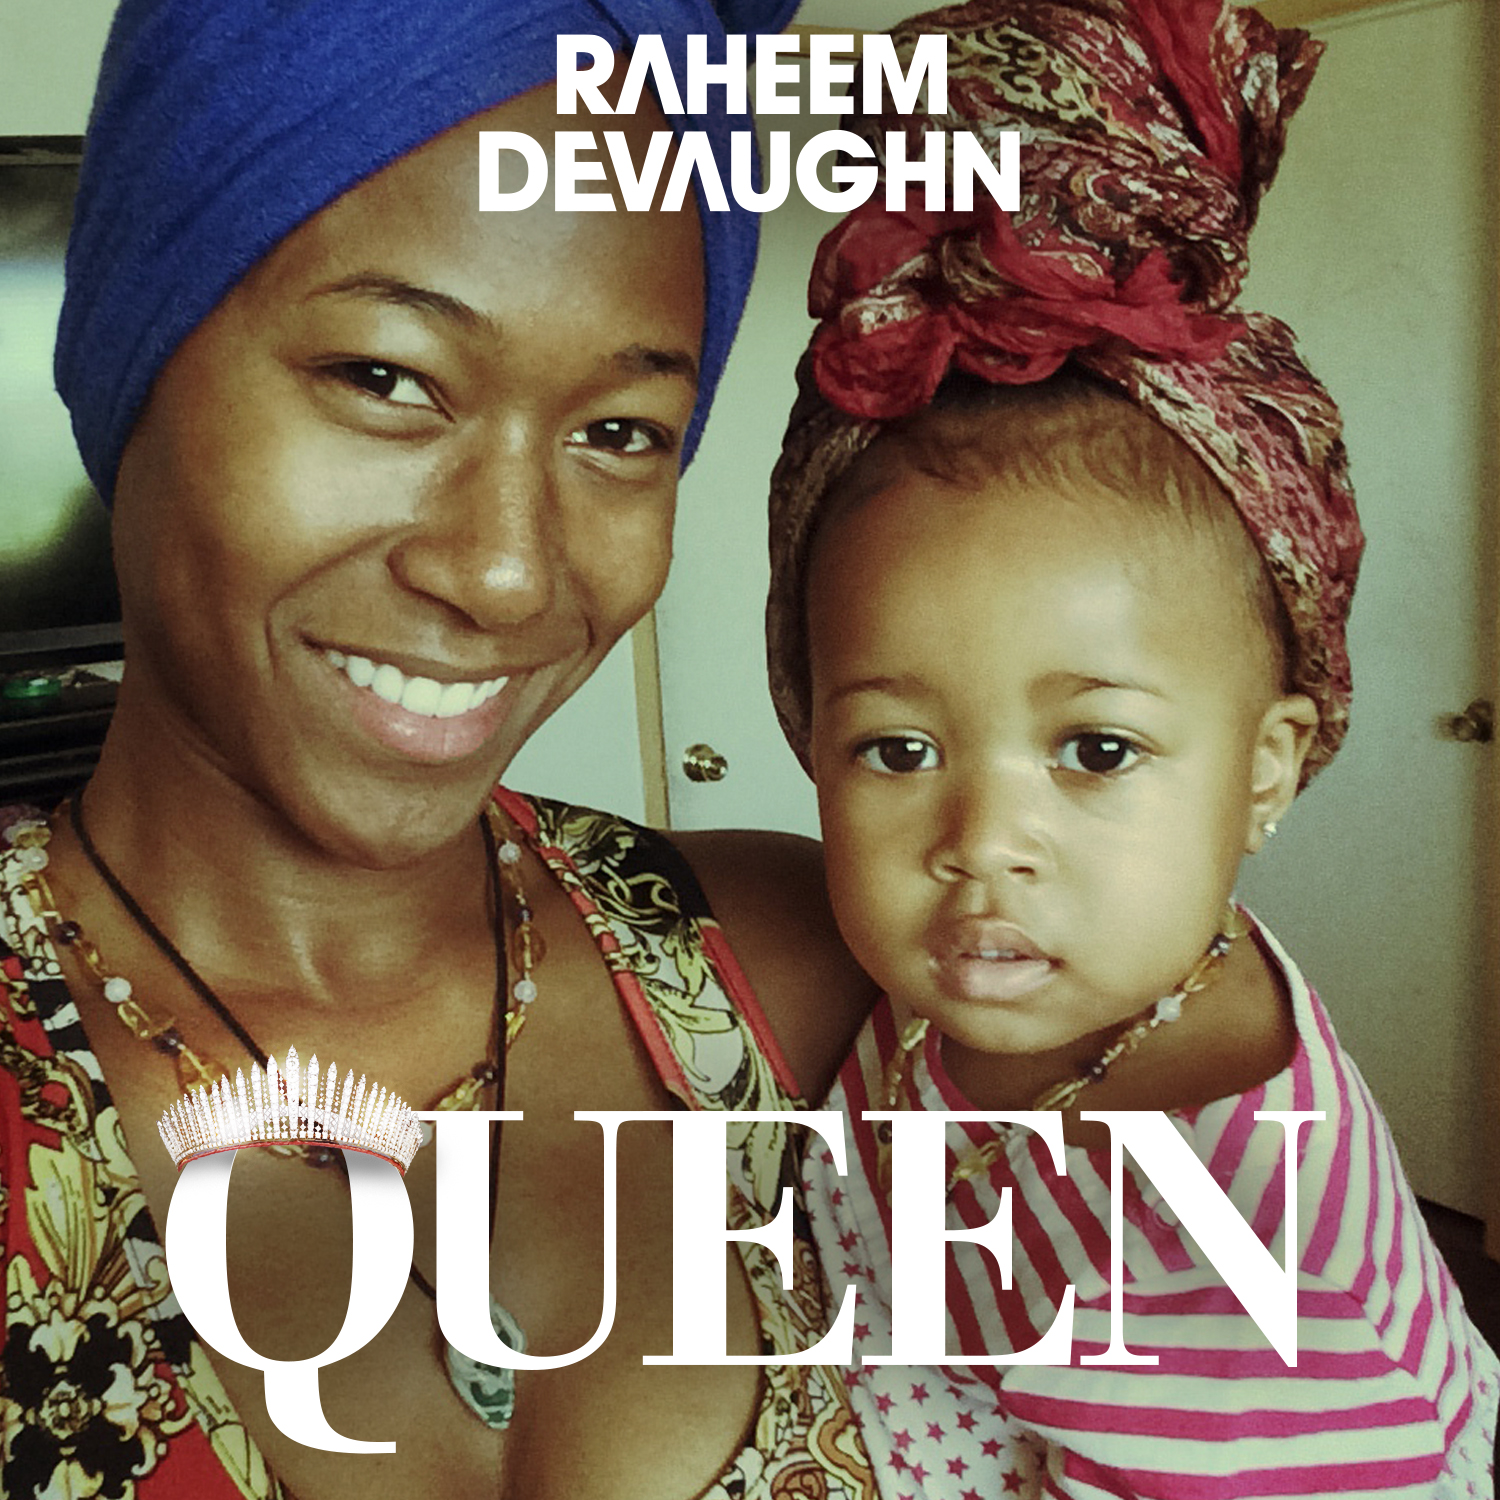 New Music: Raheem DeVaughn "Queen" + New Album "Love, Sex, and Passion" to Release in February